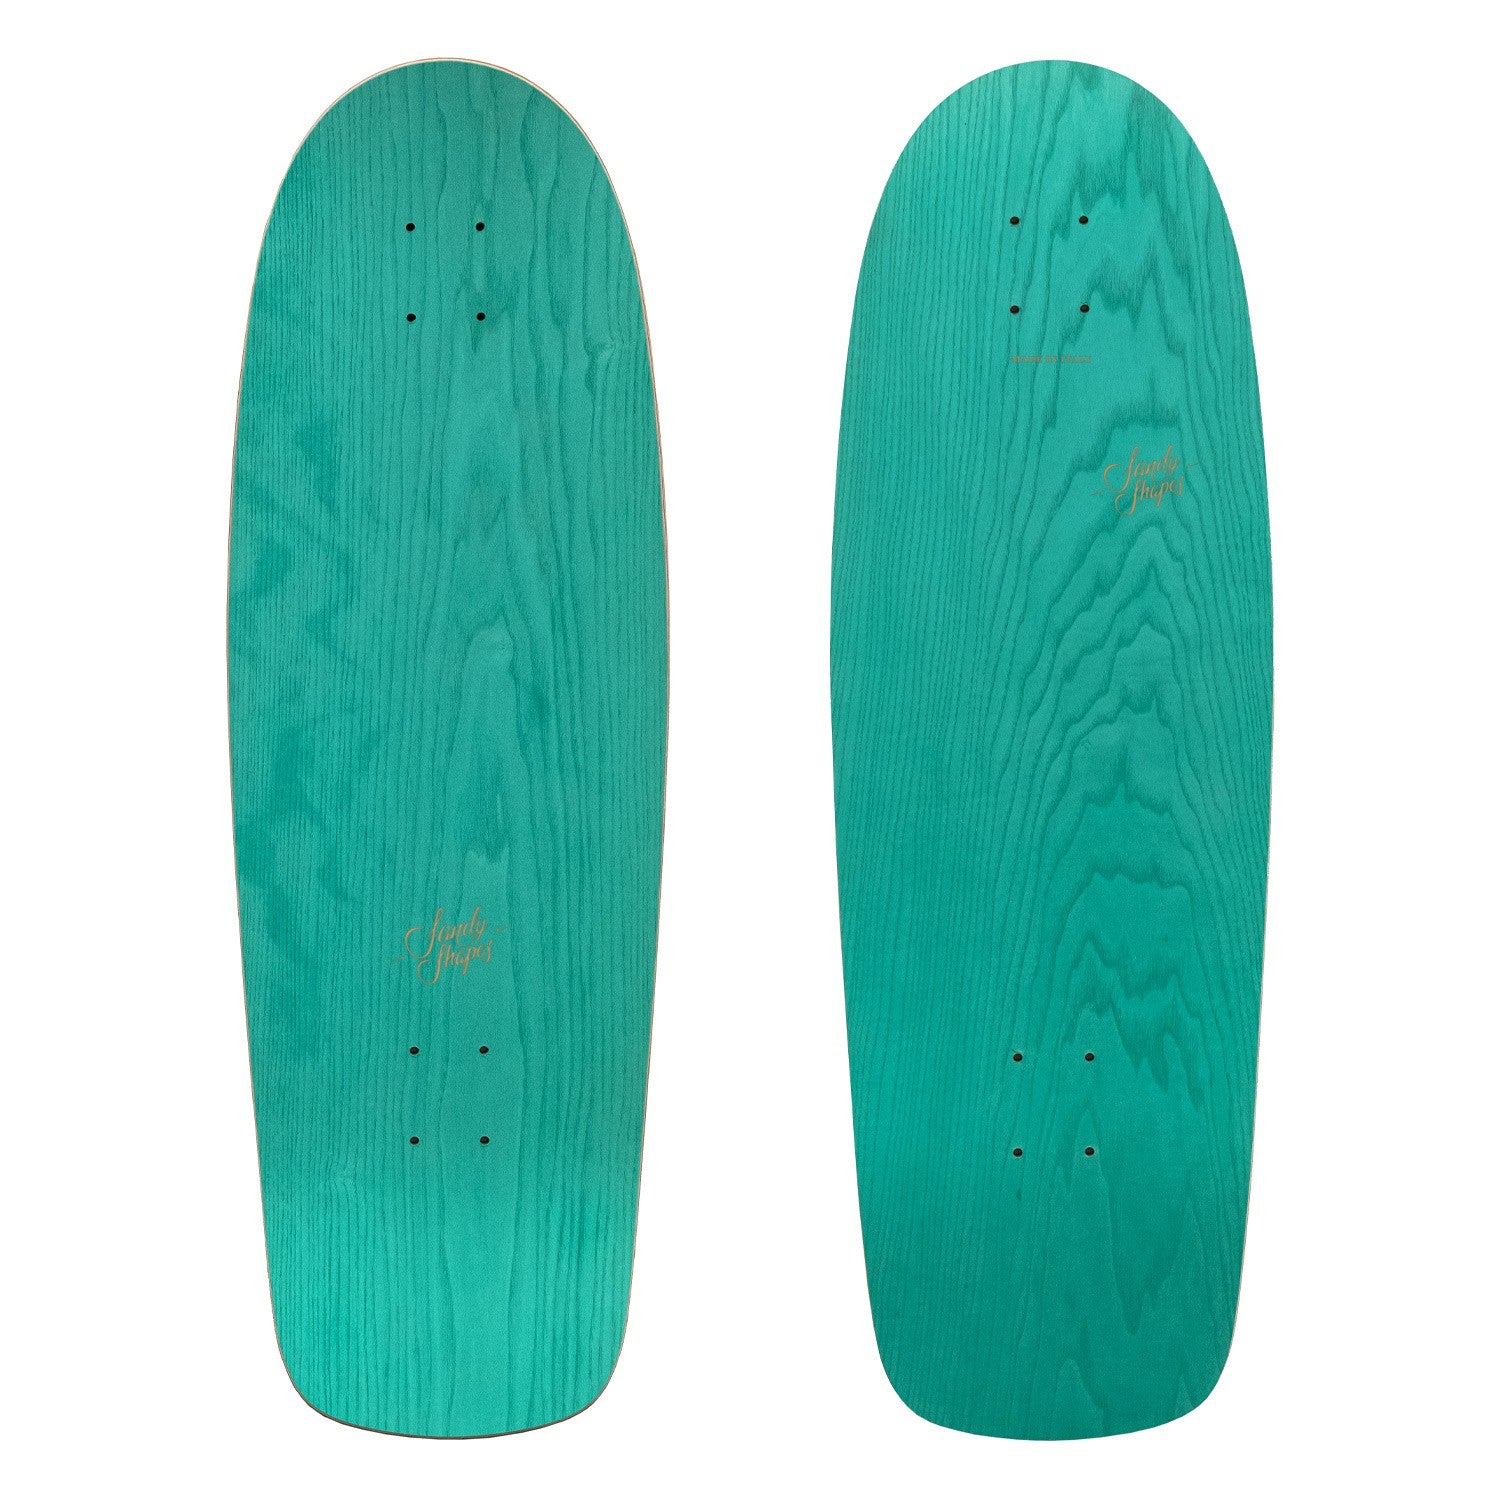 Sandy Shapes - Pacifico Surf Skate (Complete Pack) - Green 